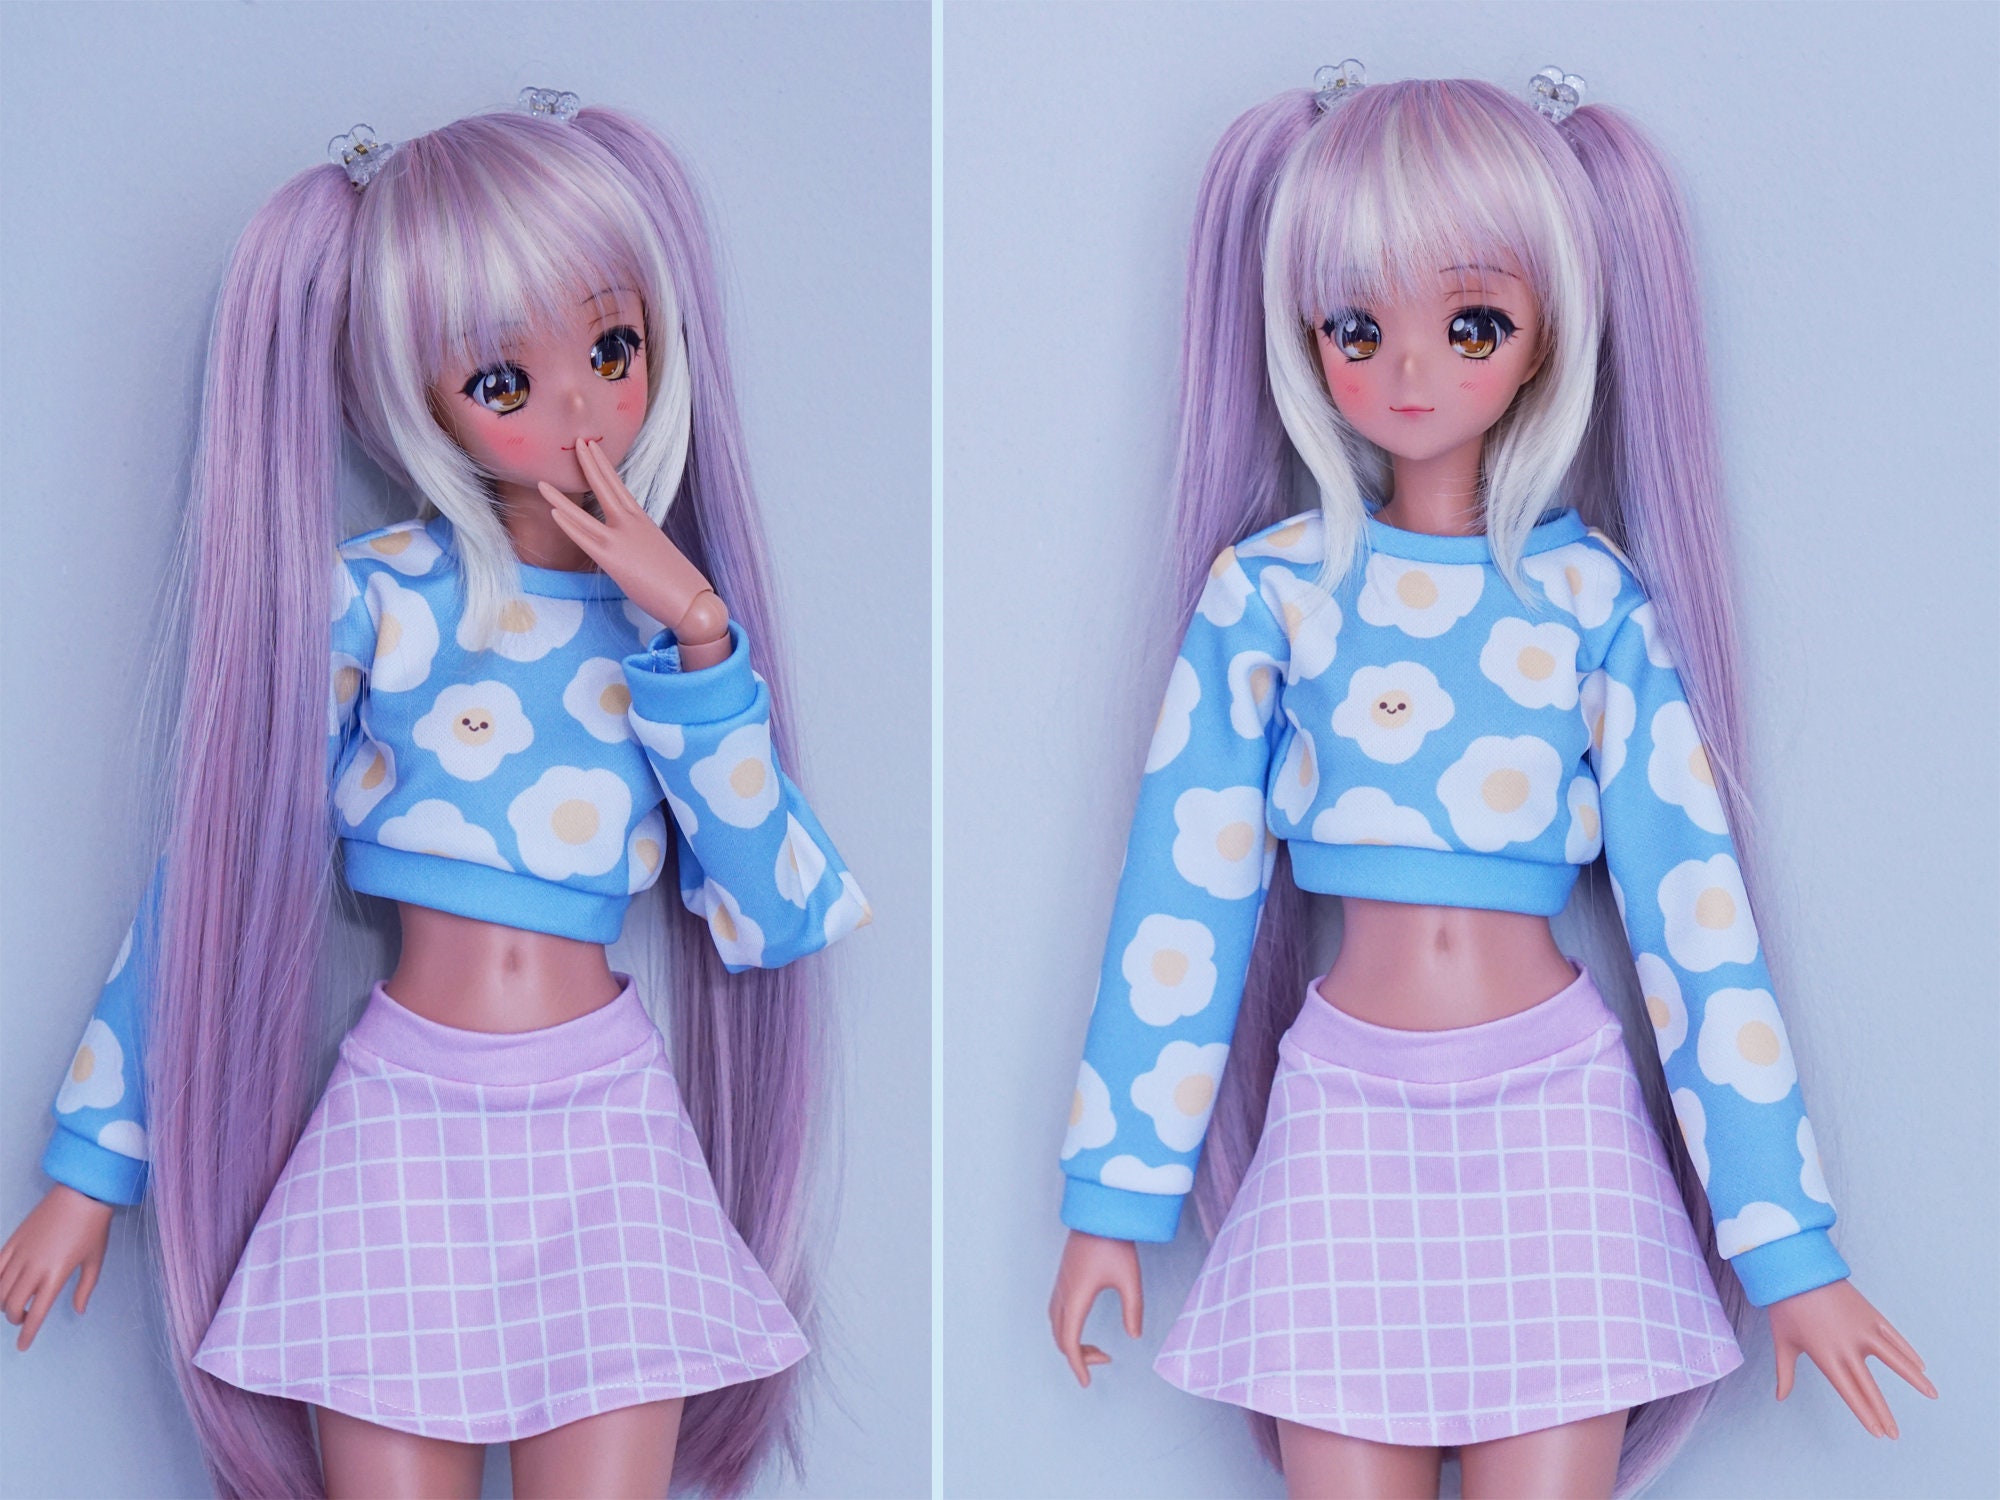 Pastel Clothes for Smart Doll, Cute Sunny Egg Sweater and Skirt Outfit